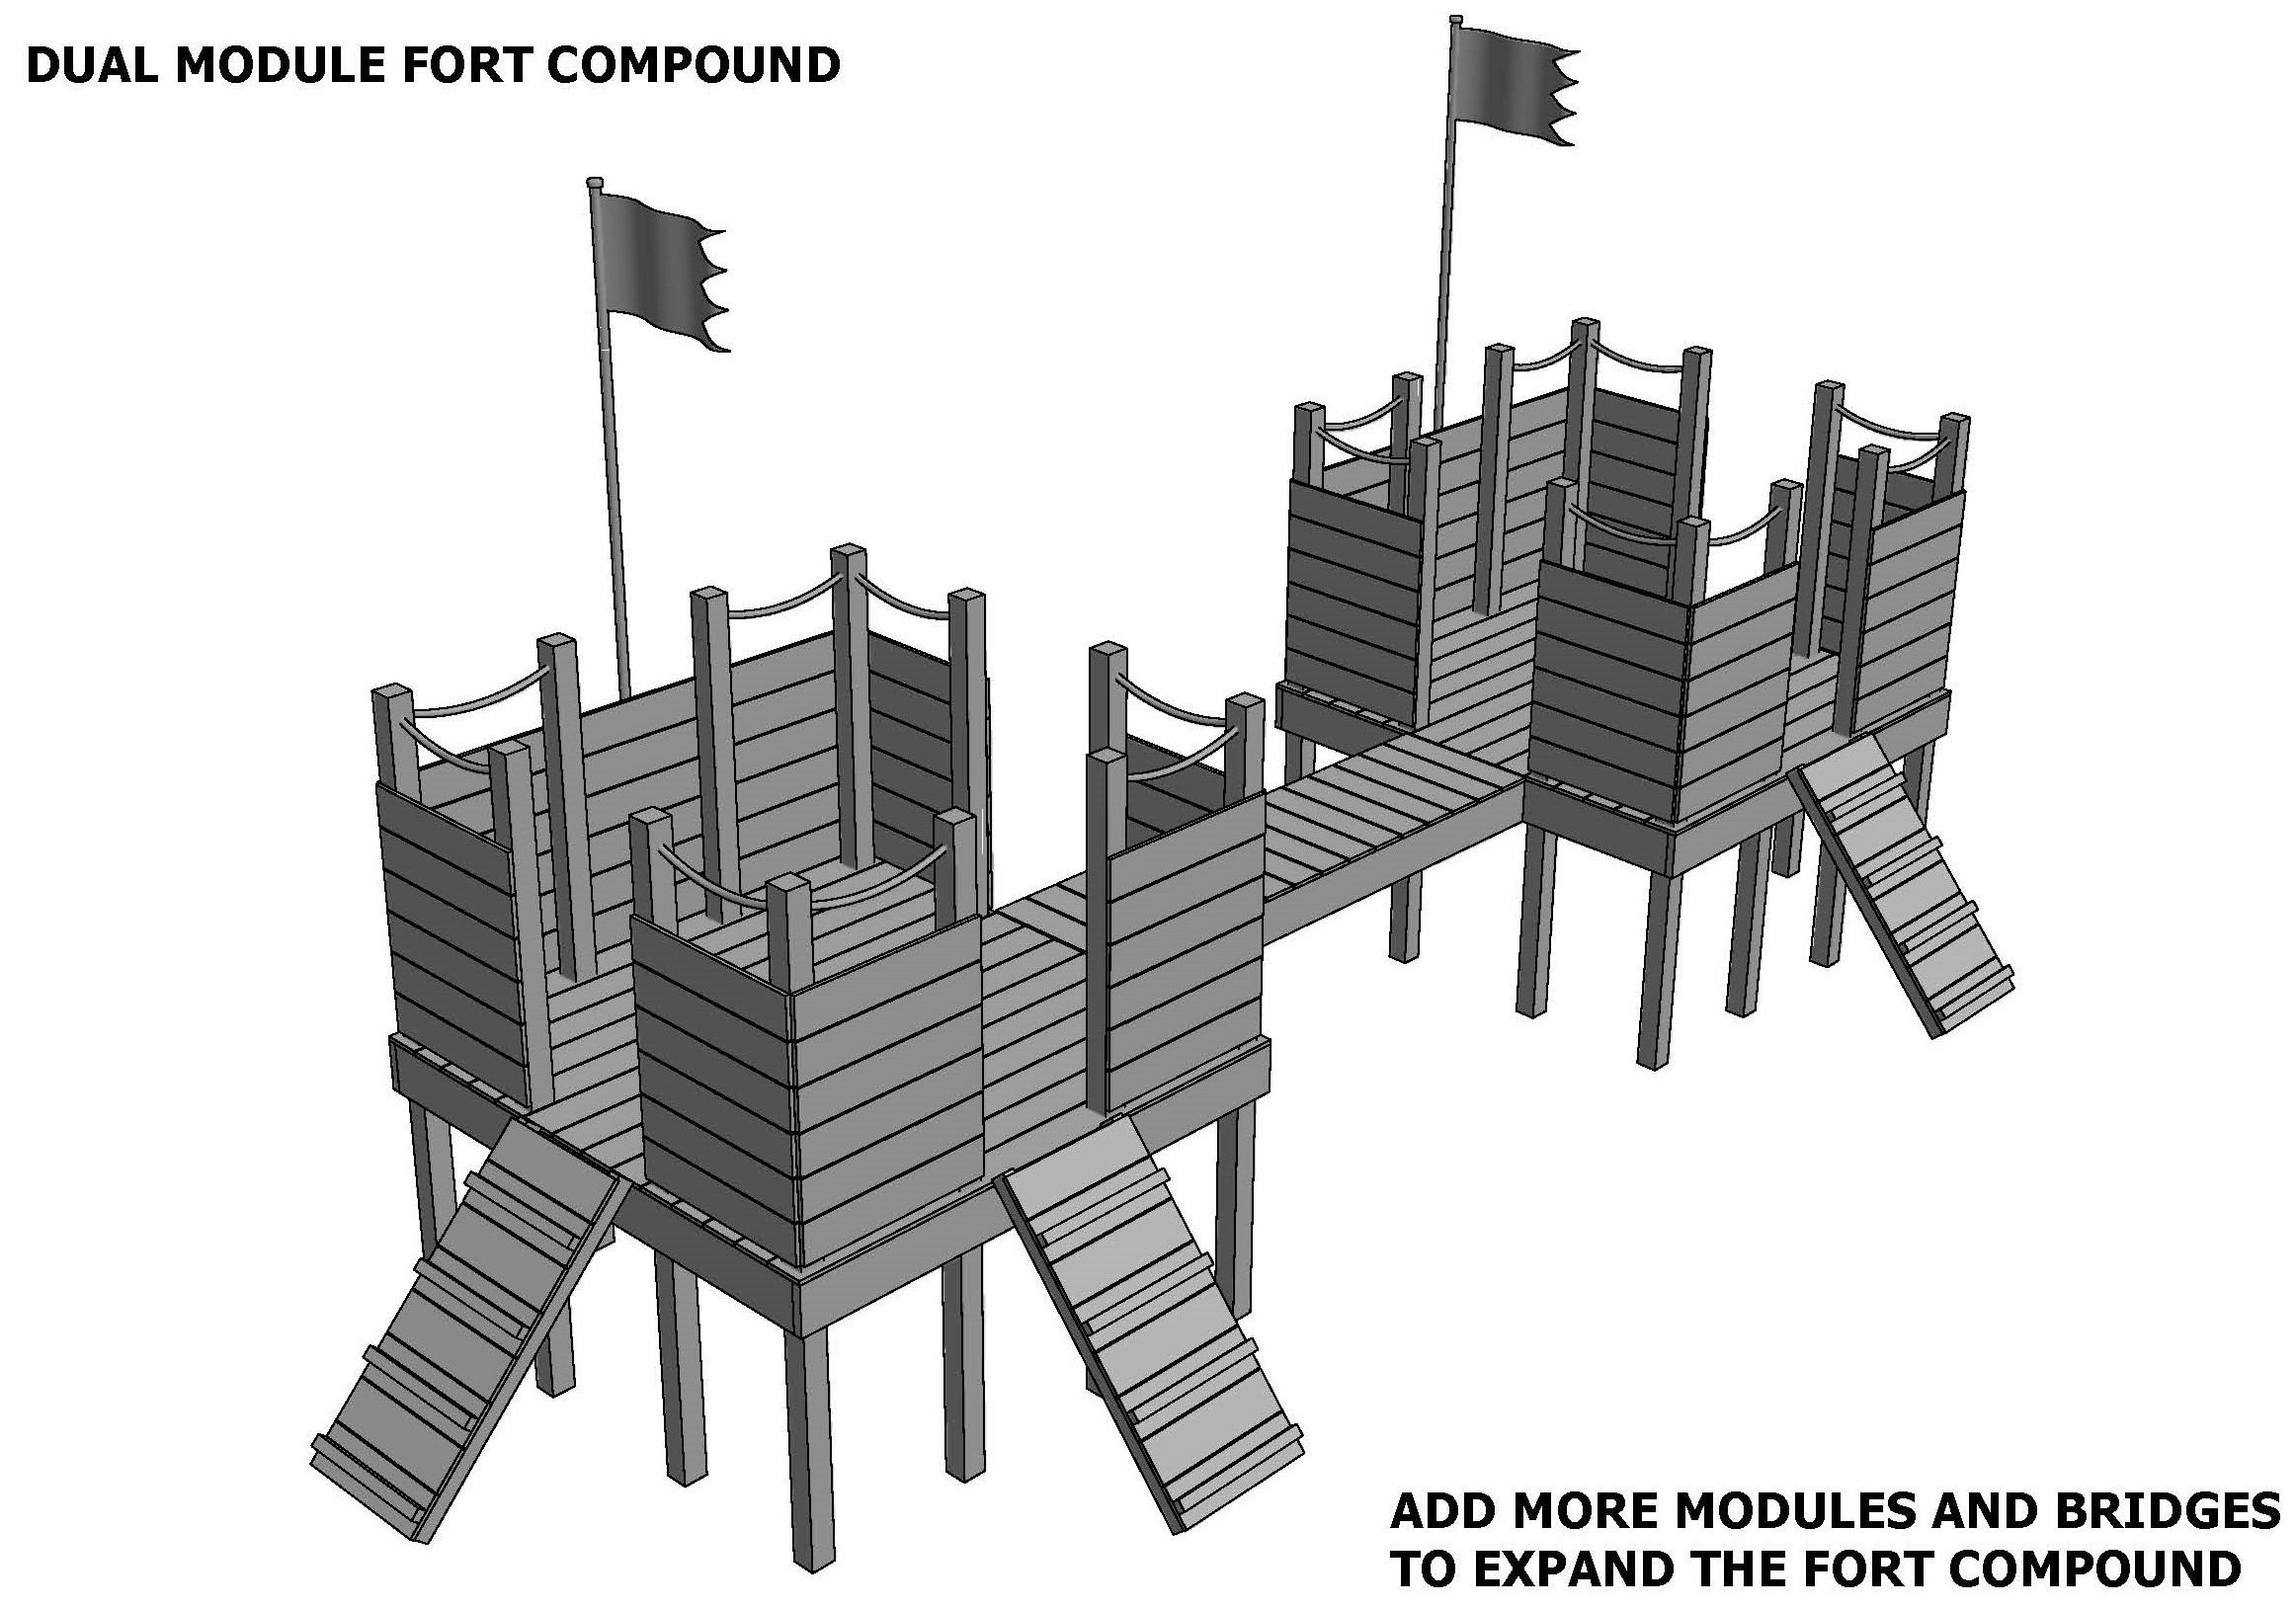 FORT KNOX CUBBY HOUSE V01 - Module Design - add to increase size of Fortress